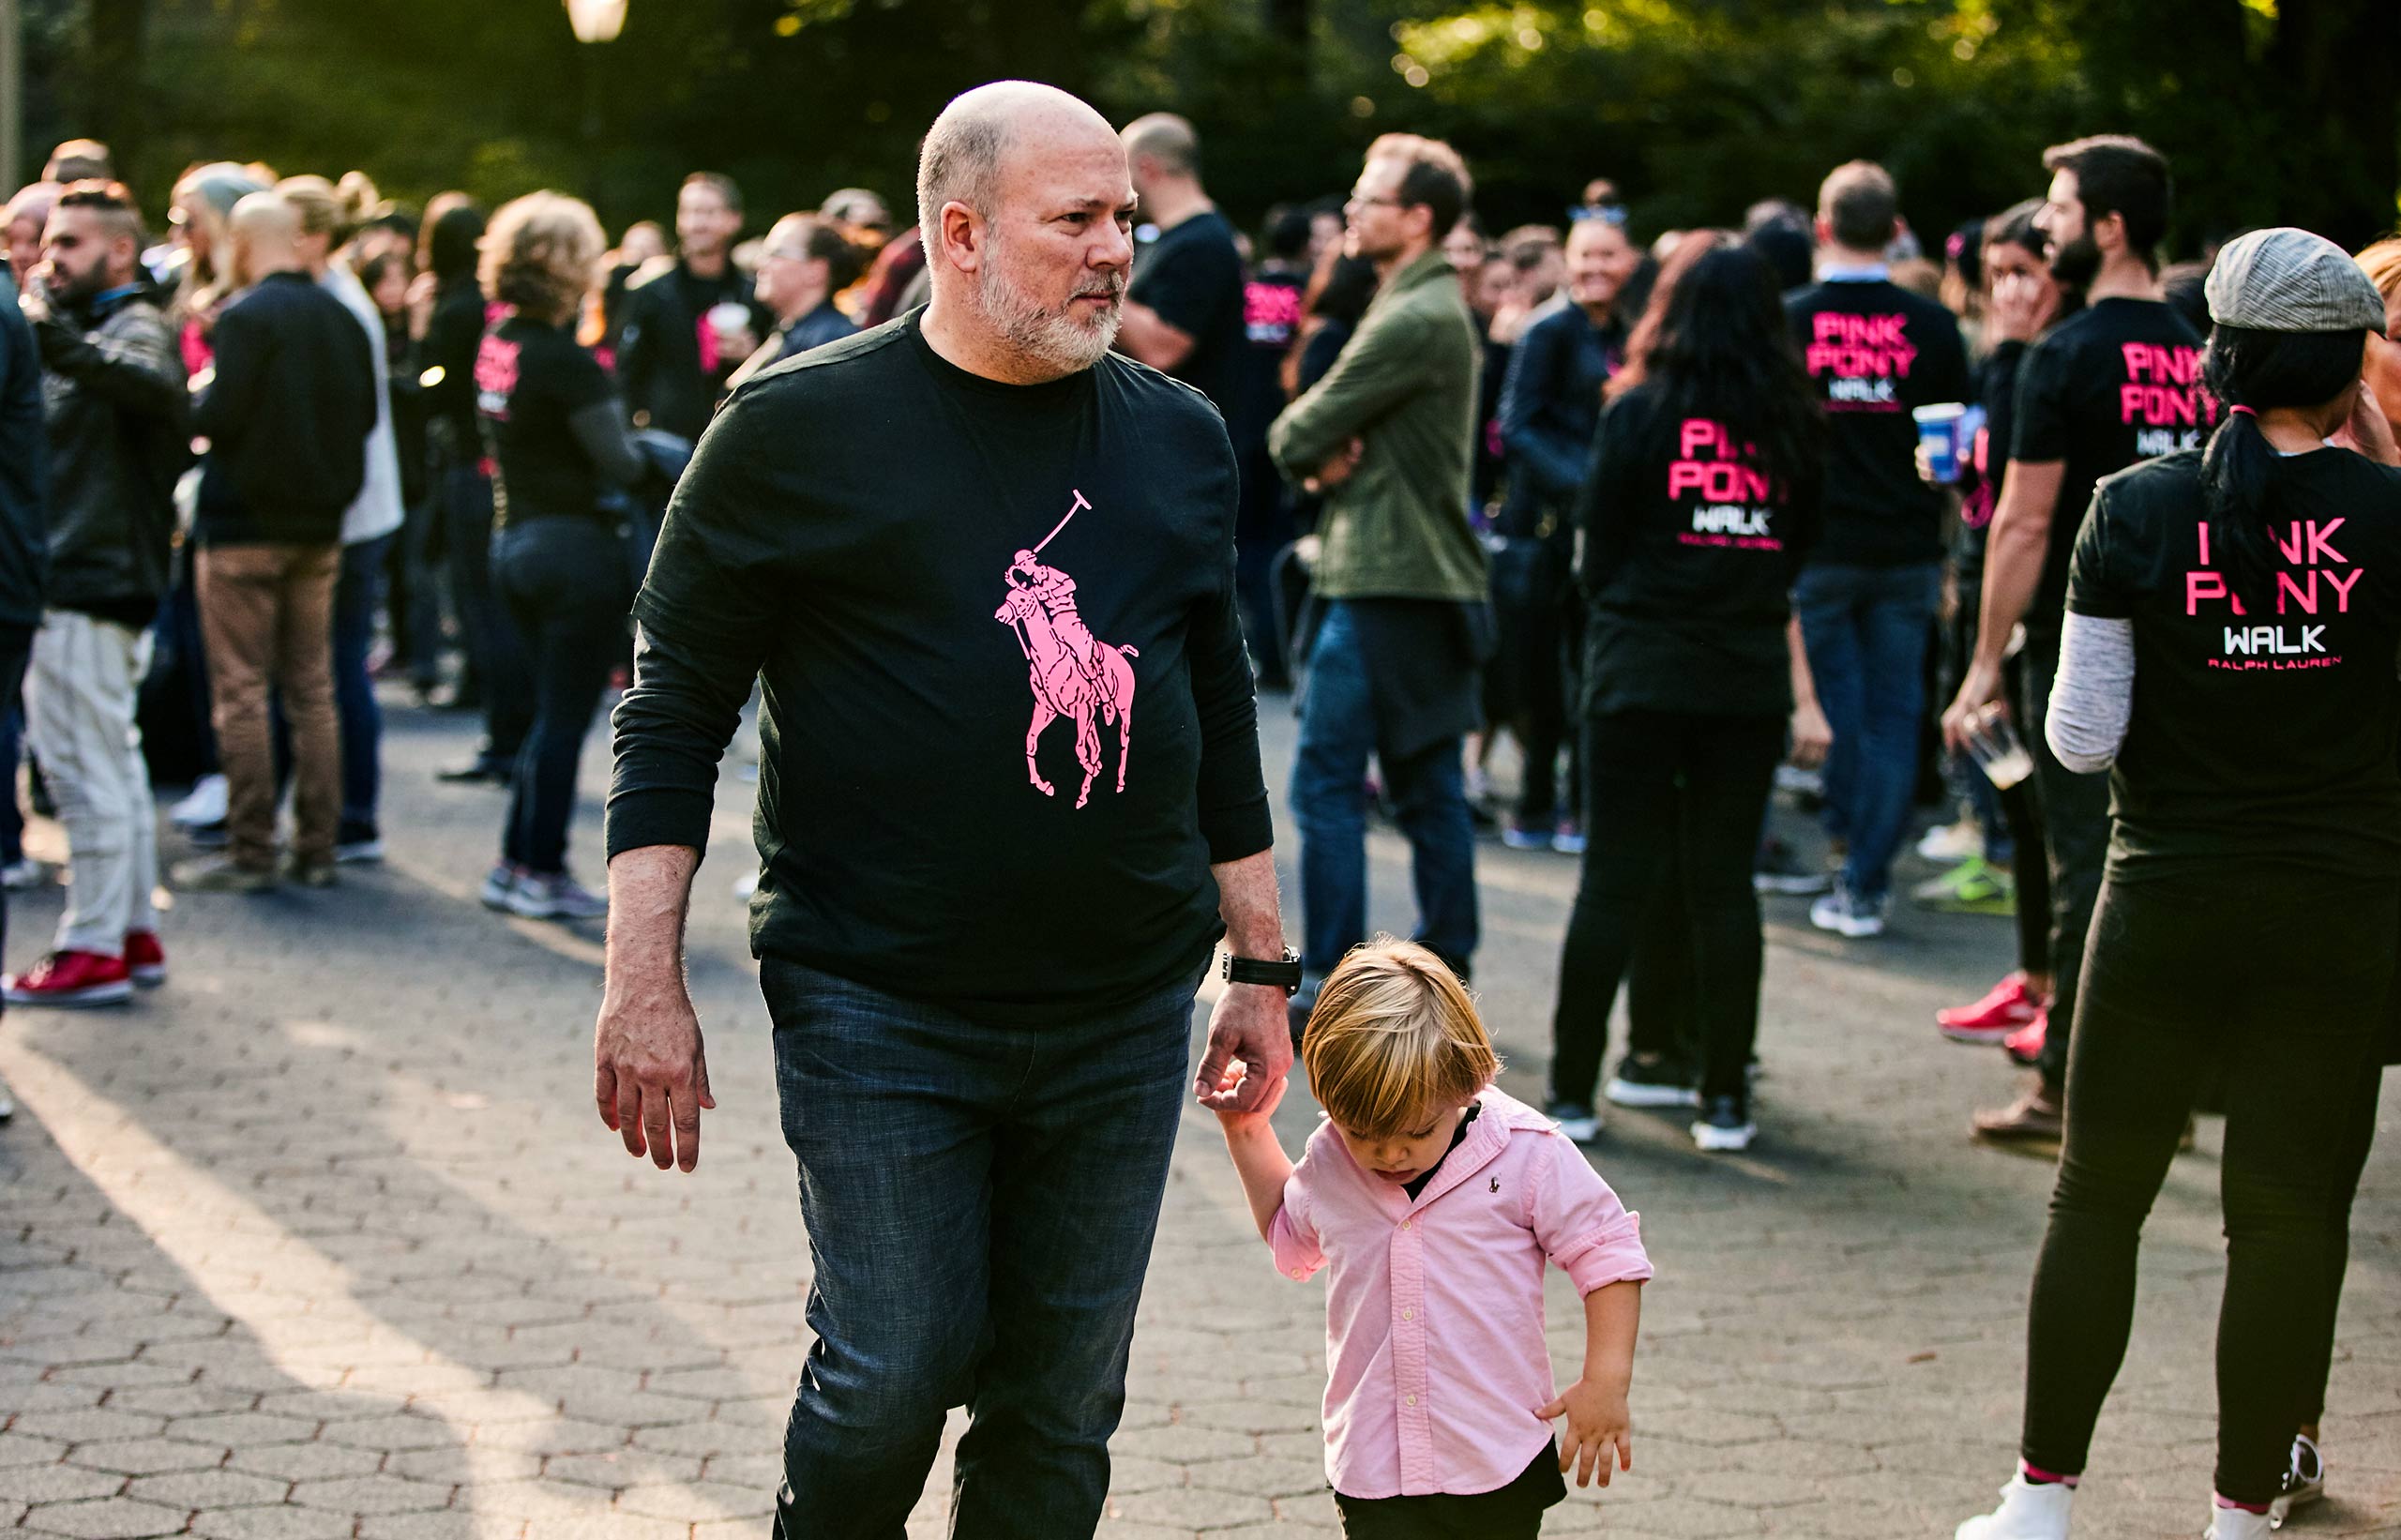 Scenes from the 2016 Pink Pony Walk in NYC